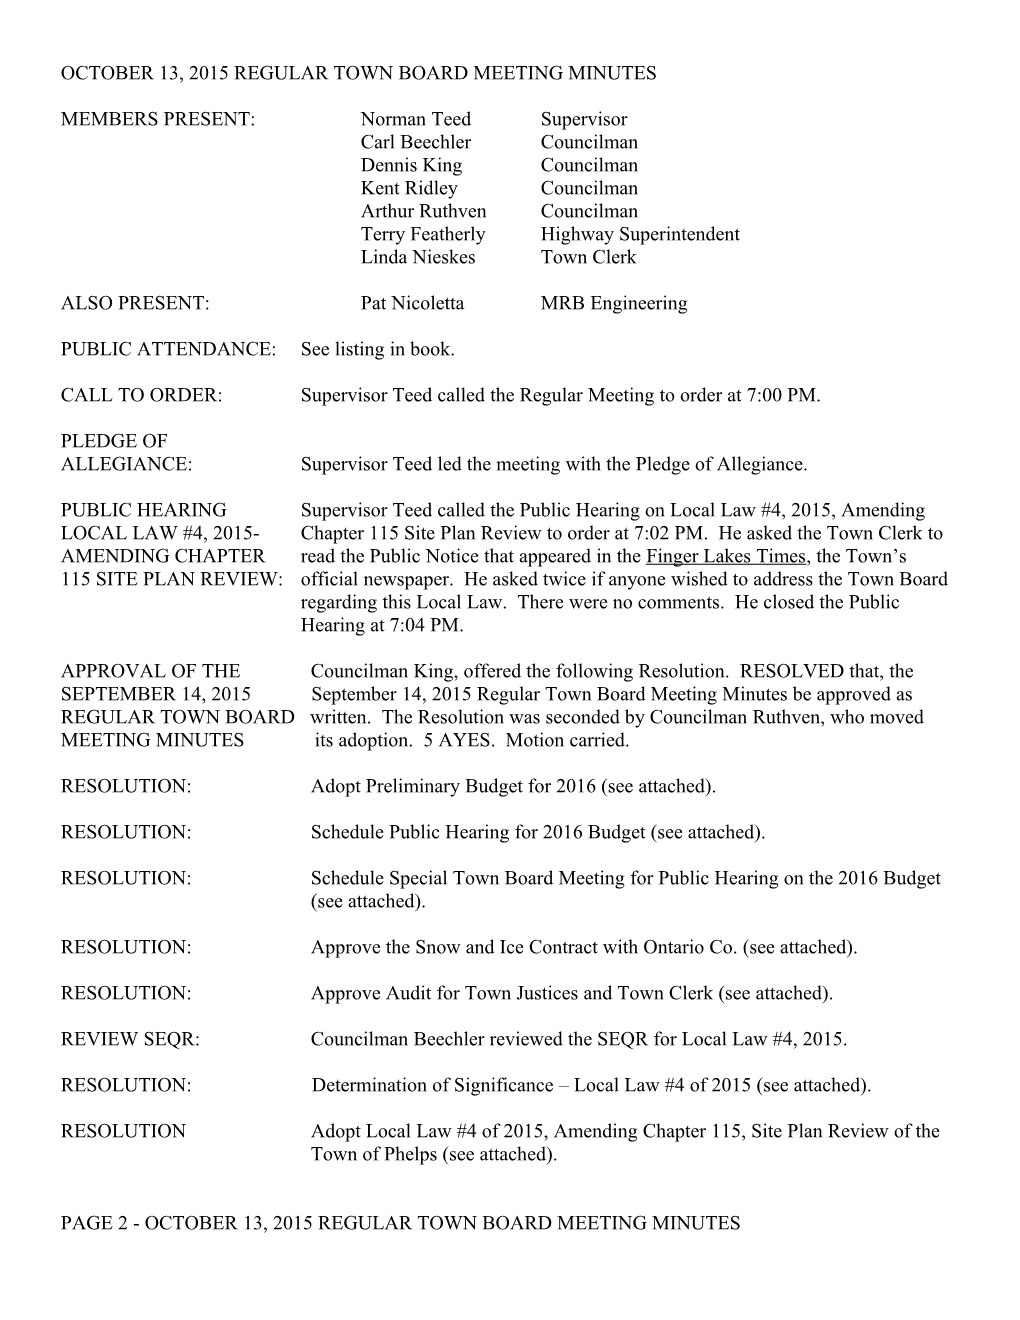 February 6, 2006 Regular Town Board Meeting Minutes